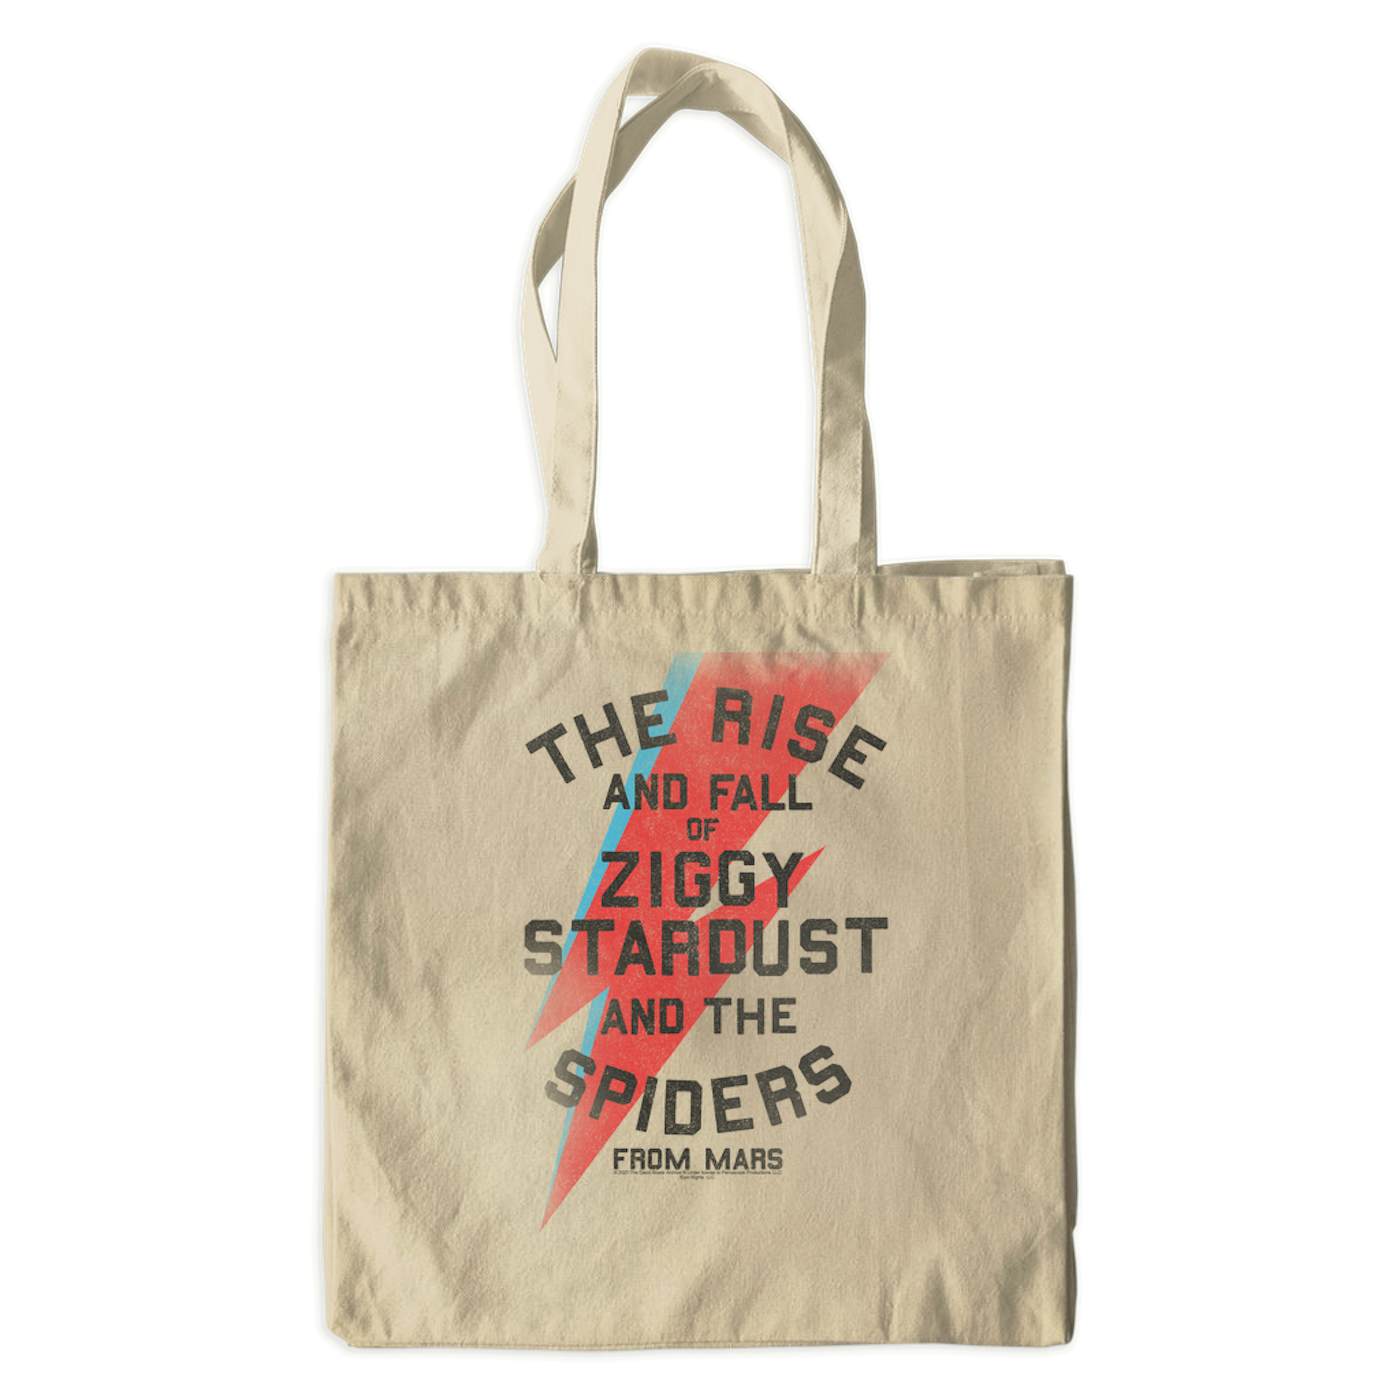 David Bowie Canvas Tote Bag | The Rise And Fall Of Ziggy Stardust And The Spiders From Mars Lightning Bolt Distressed David Bowie Bag (Merchbar Exclusive)